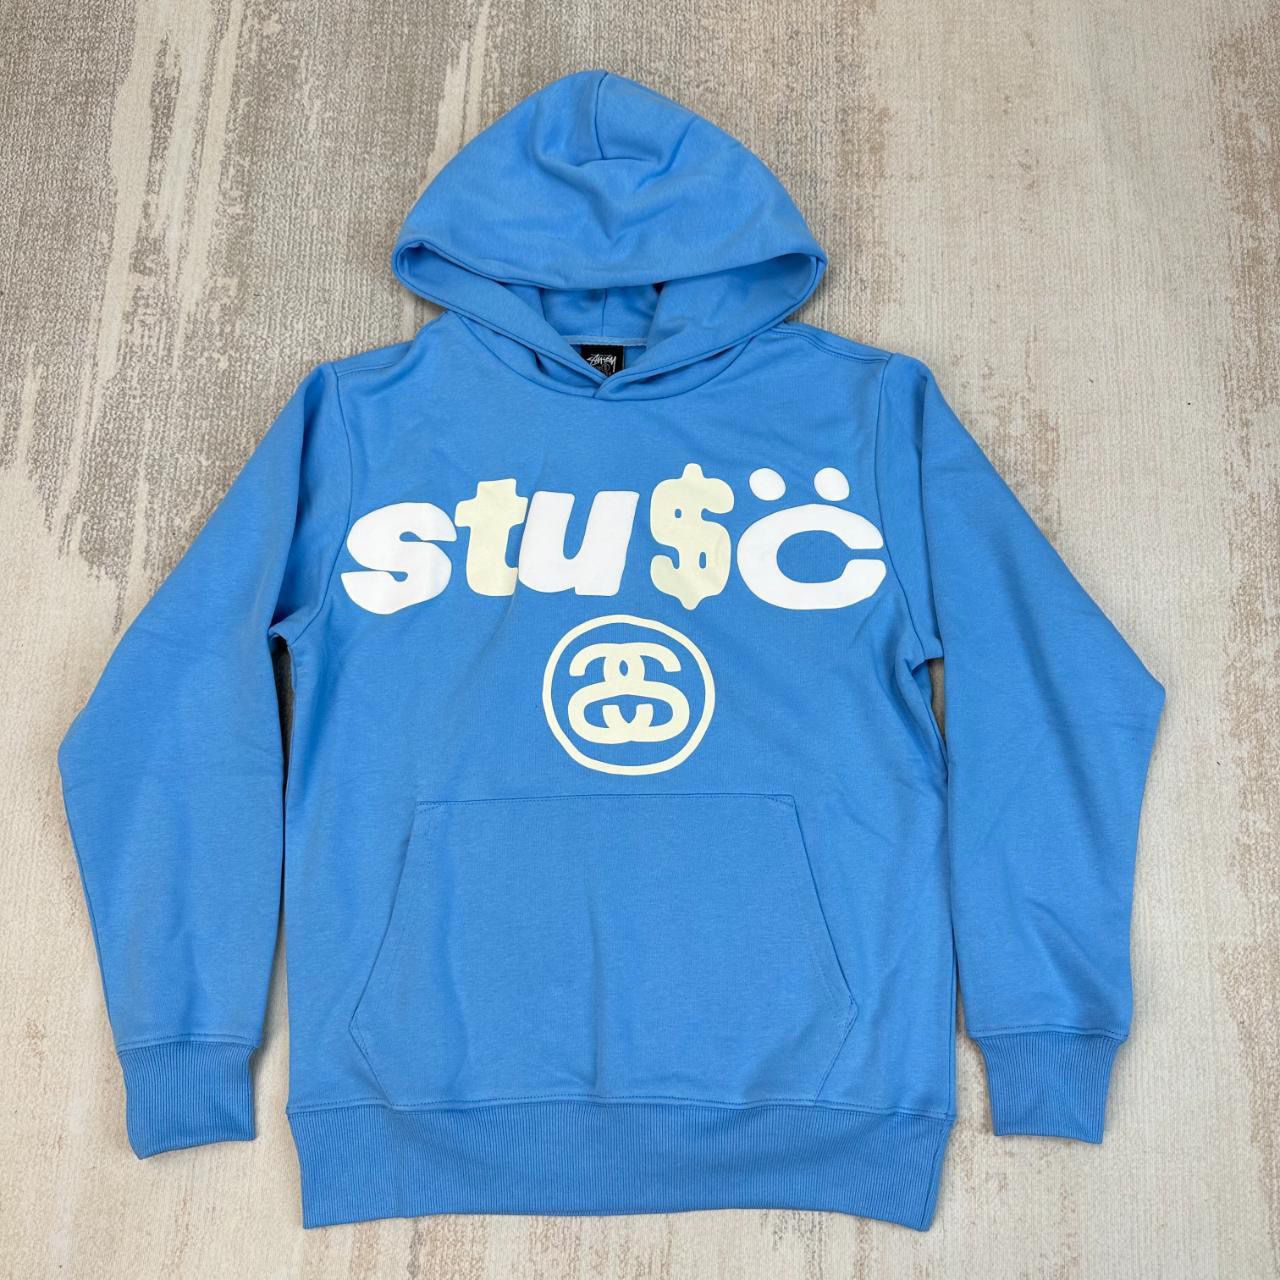 Stussy × CPFM 8 Ball Pigment Dyed Hoodie for Sale in Redwood